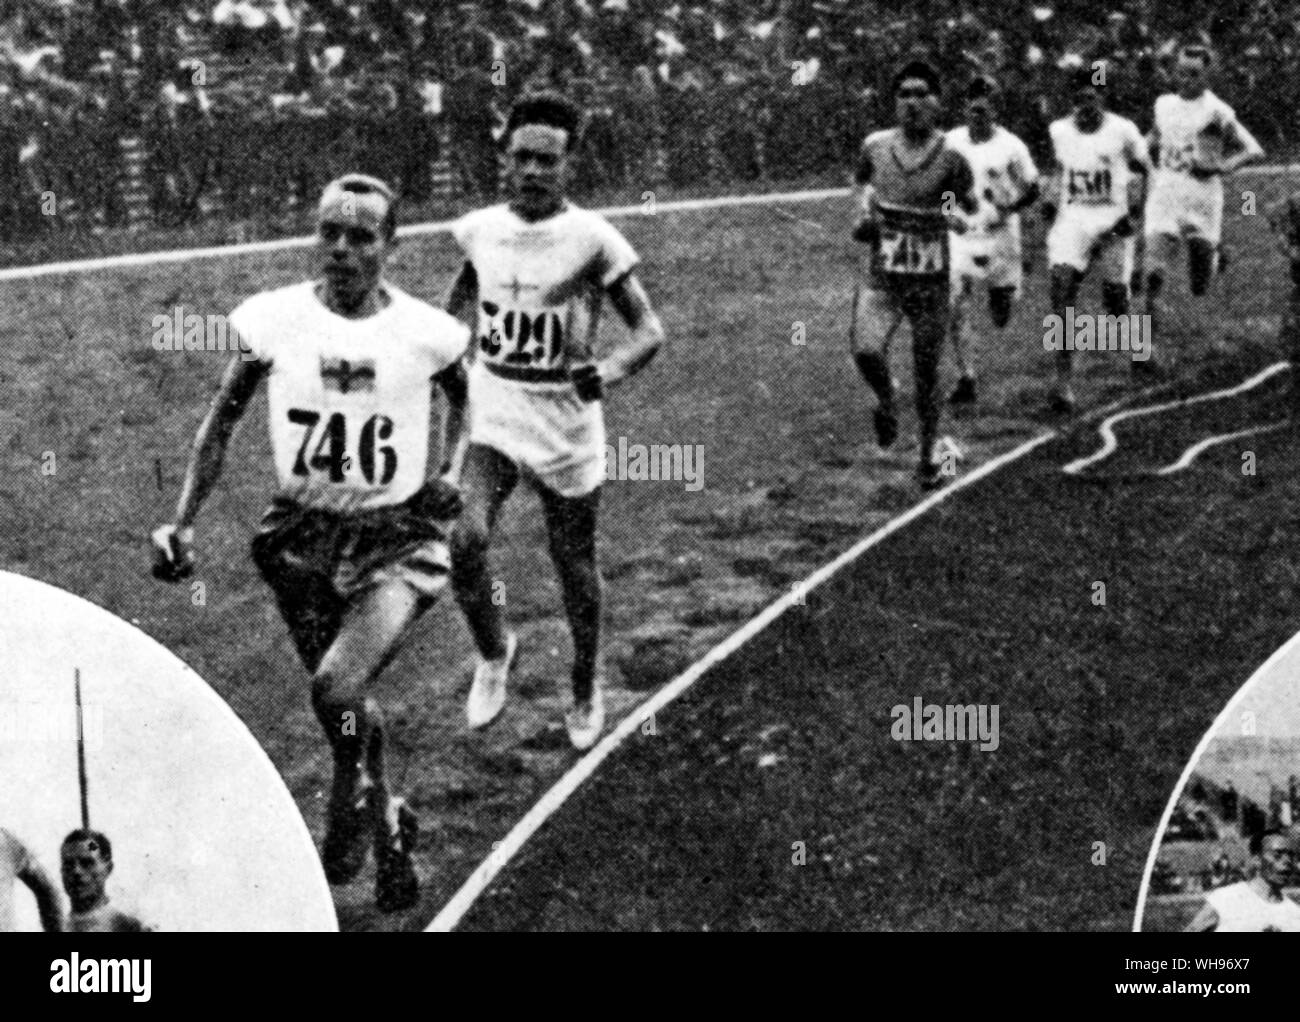 France, Paris Olympics, 1924: Men's 5000 metres final. Wide leads, followed by Ritola, Dolques, Saunders, Clibbon, Nurmi, Romig and Sappala.. Stock Photo